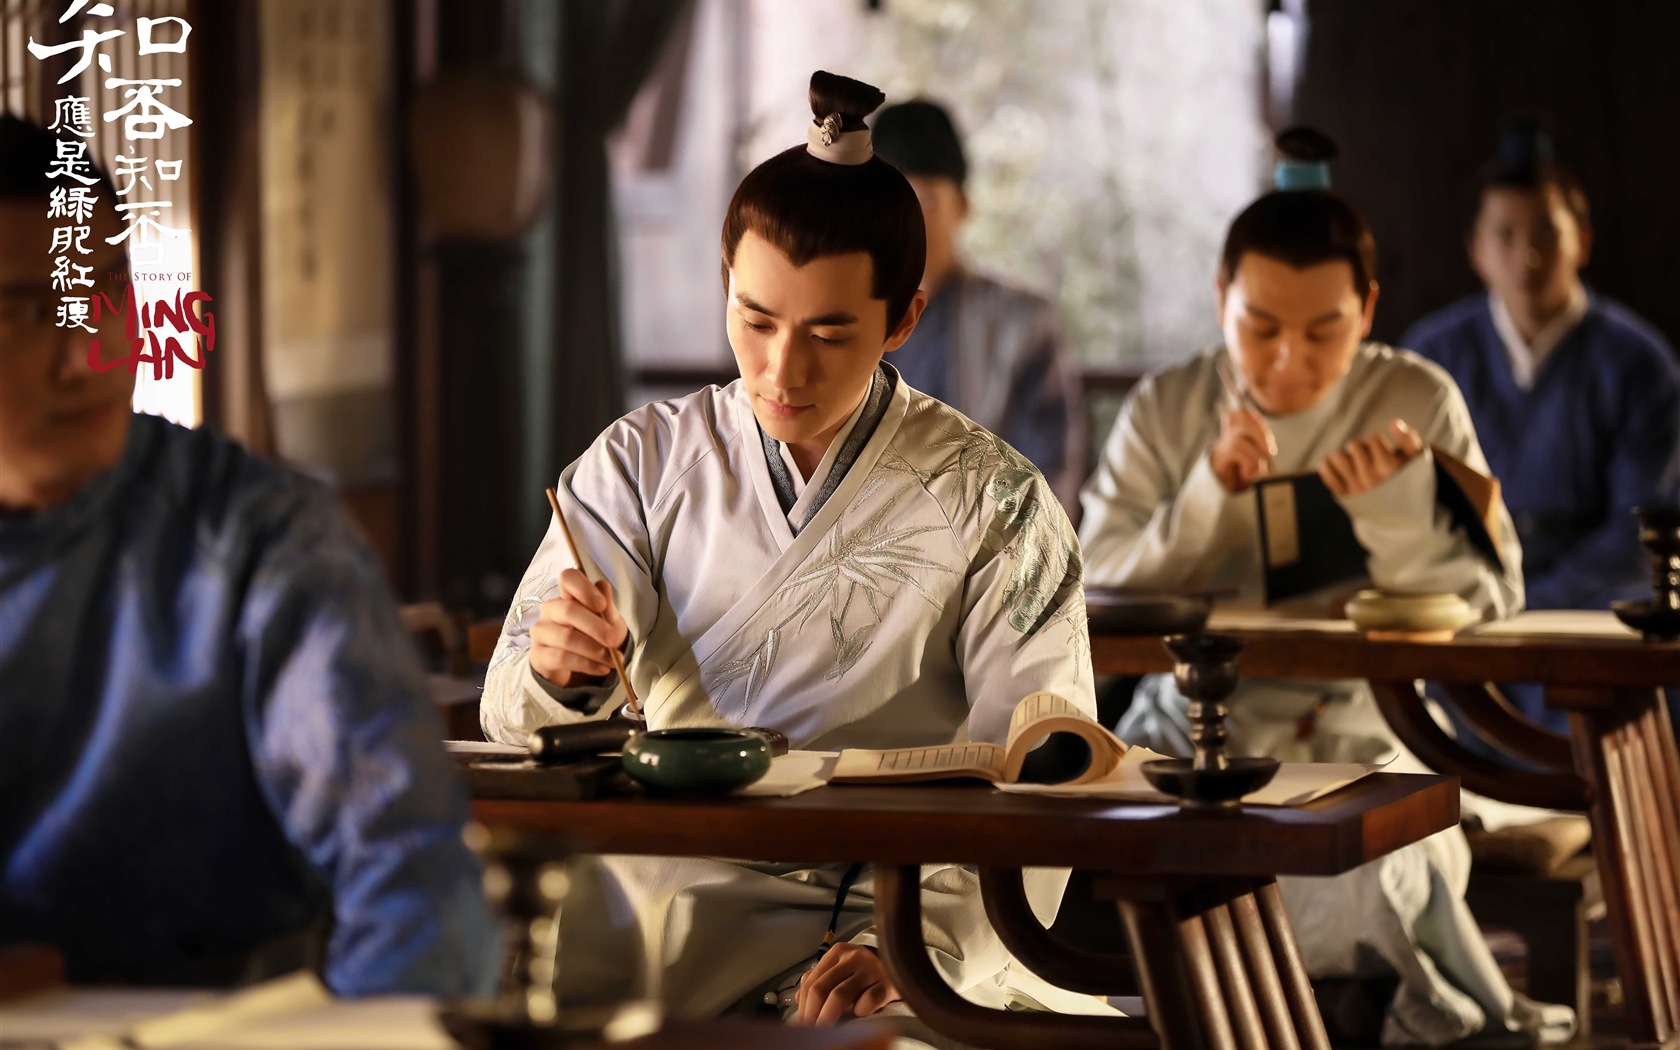 The Story Of MingLan, TV series HD wallpapers #37 - 1680x1050